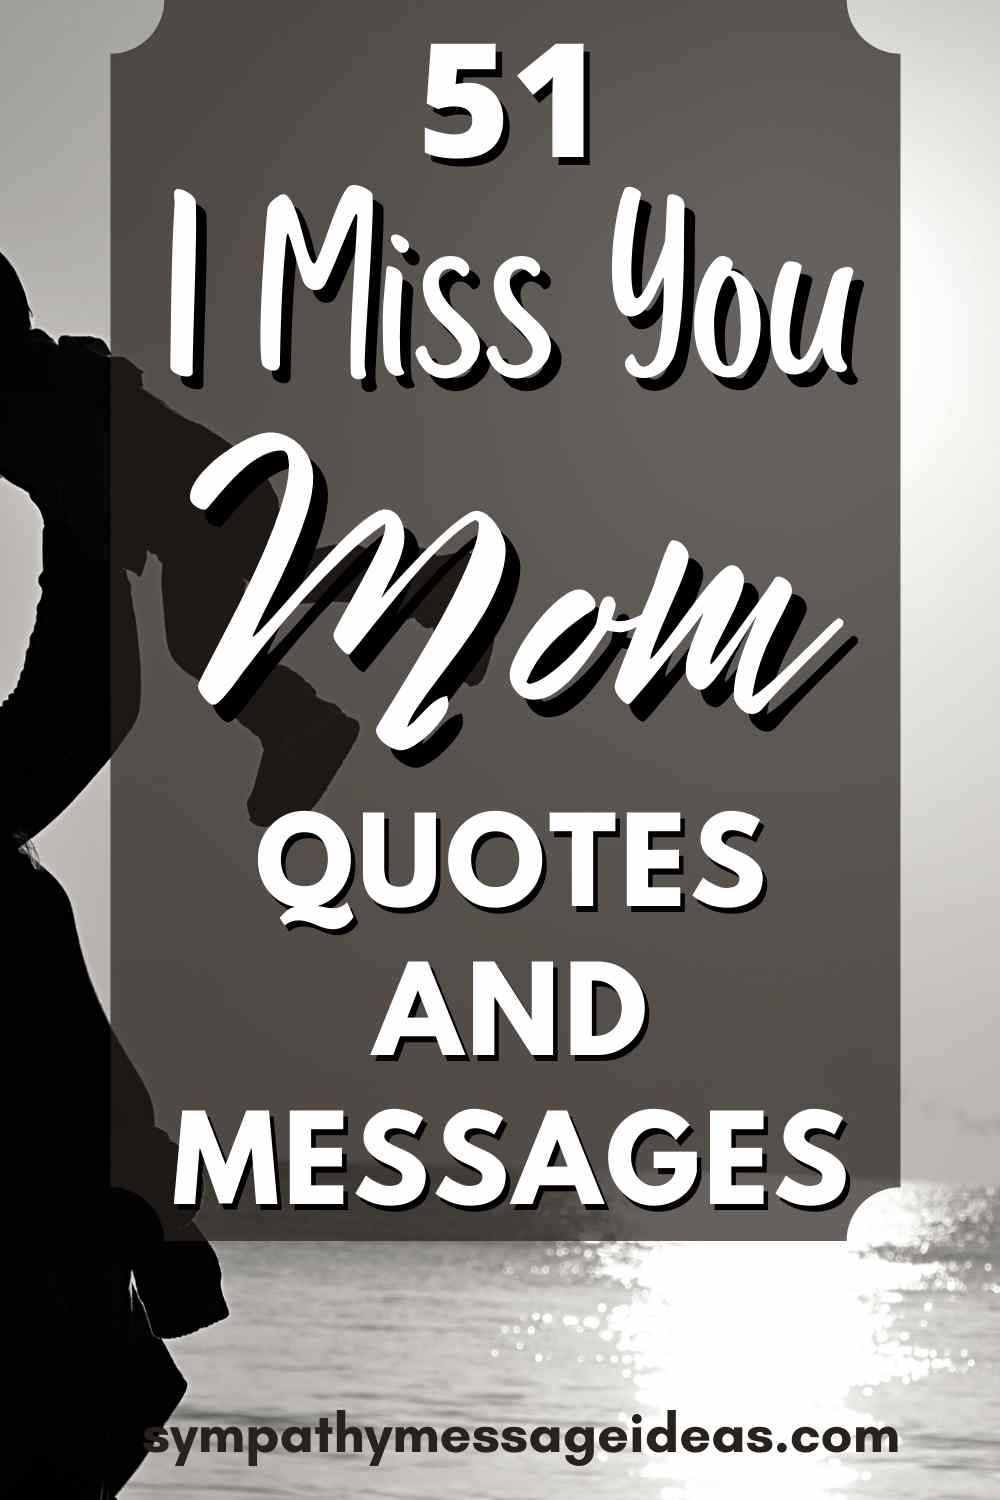 rip mom quotes sayings